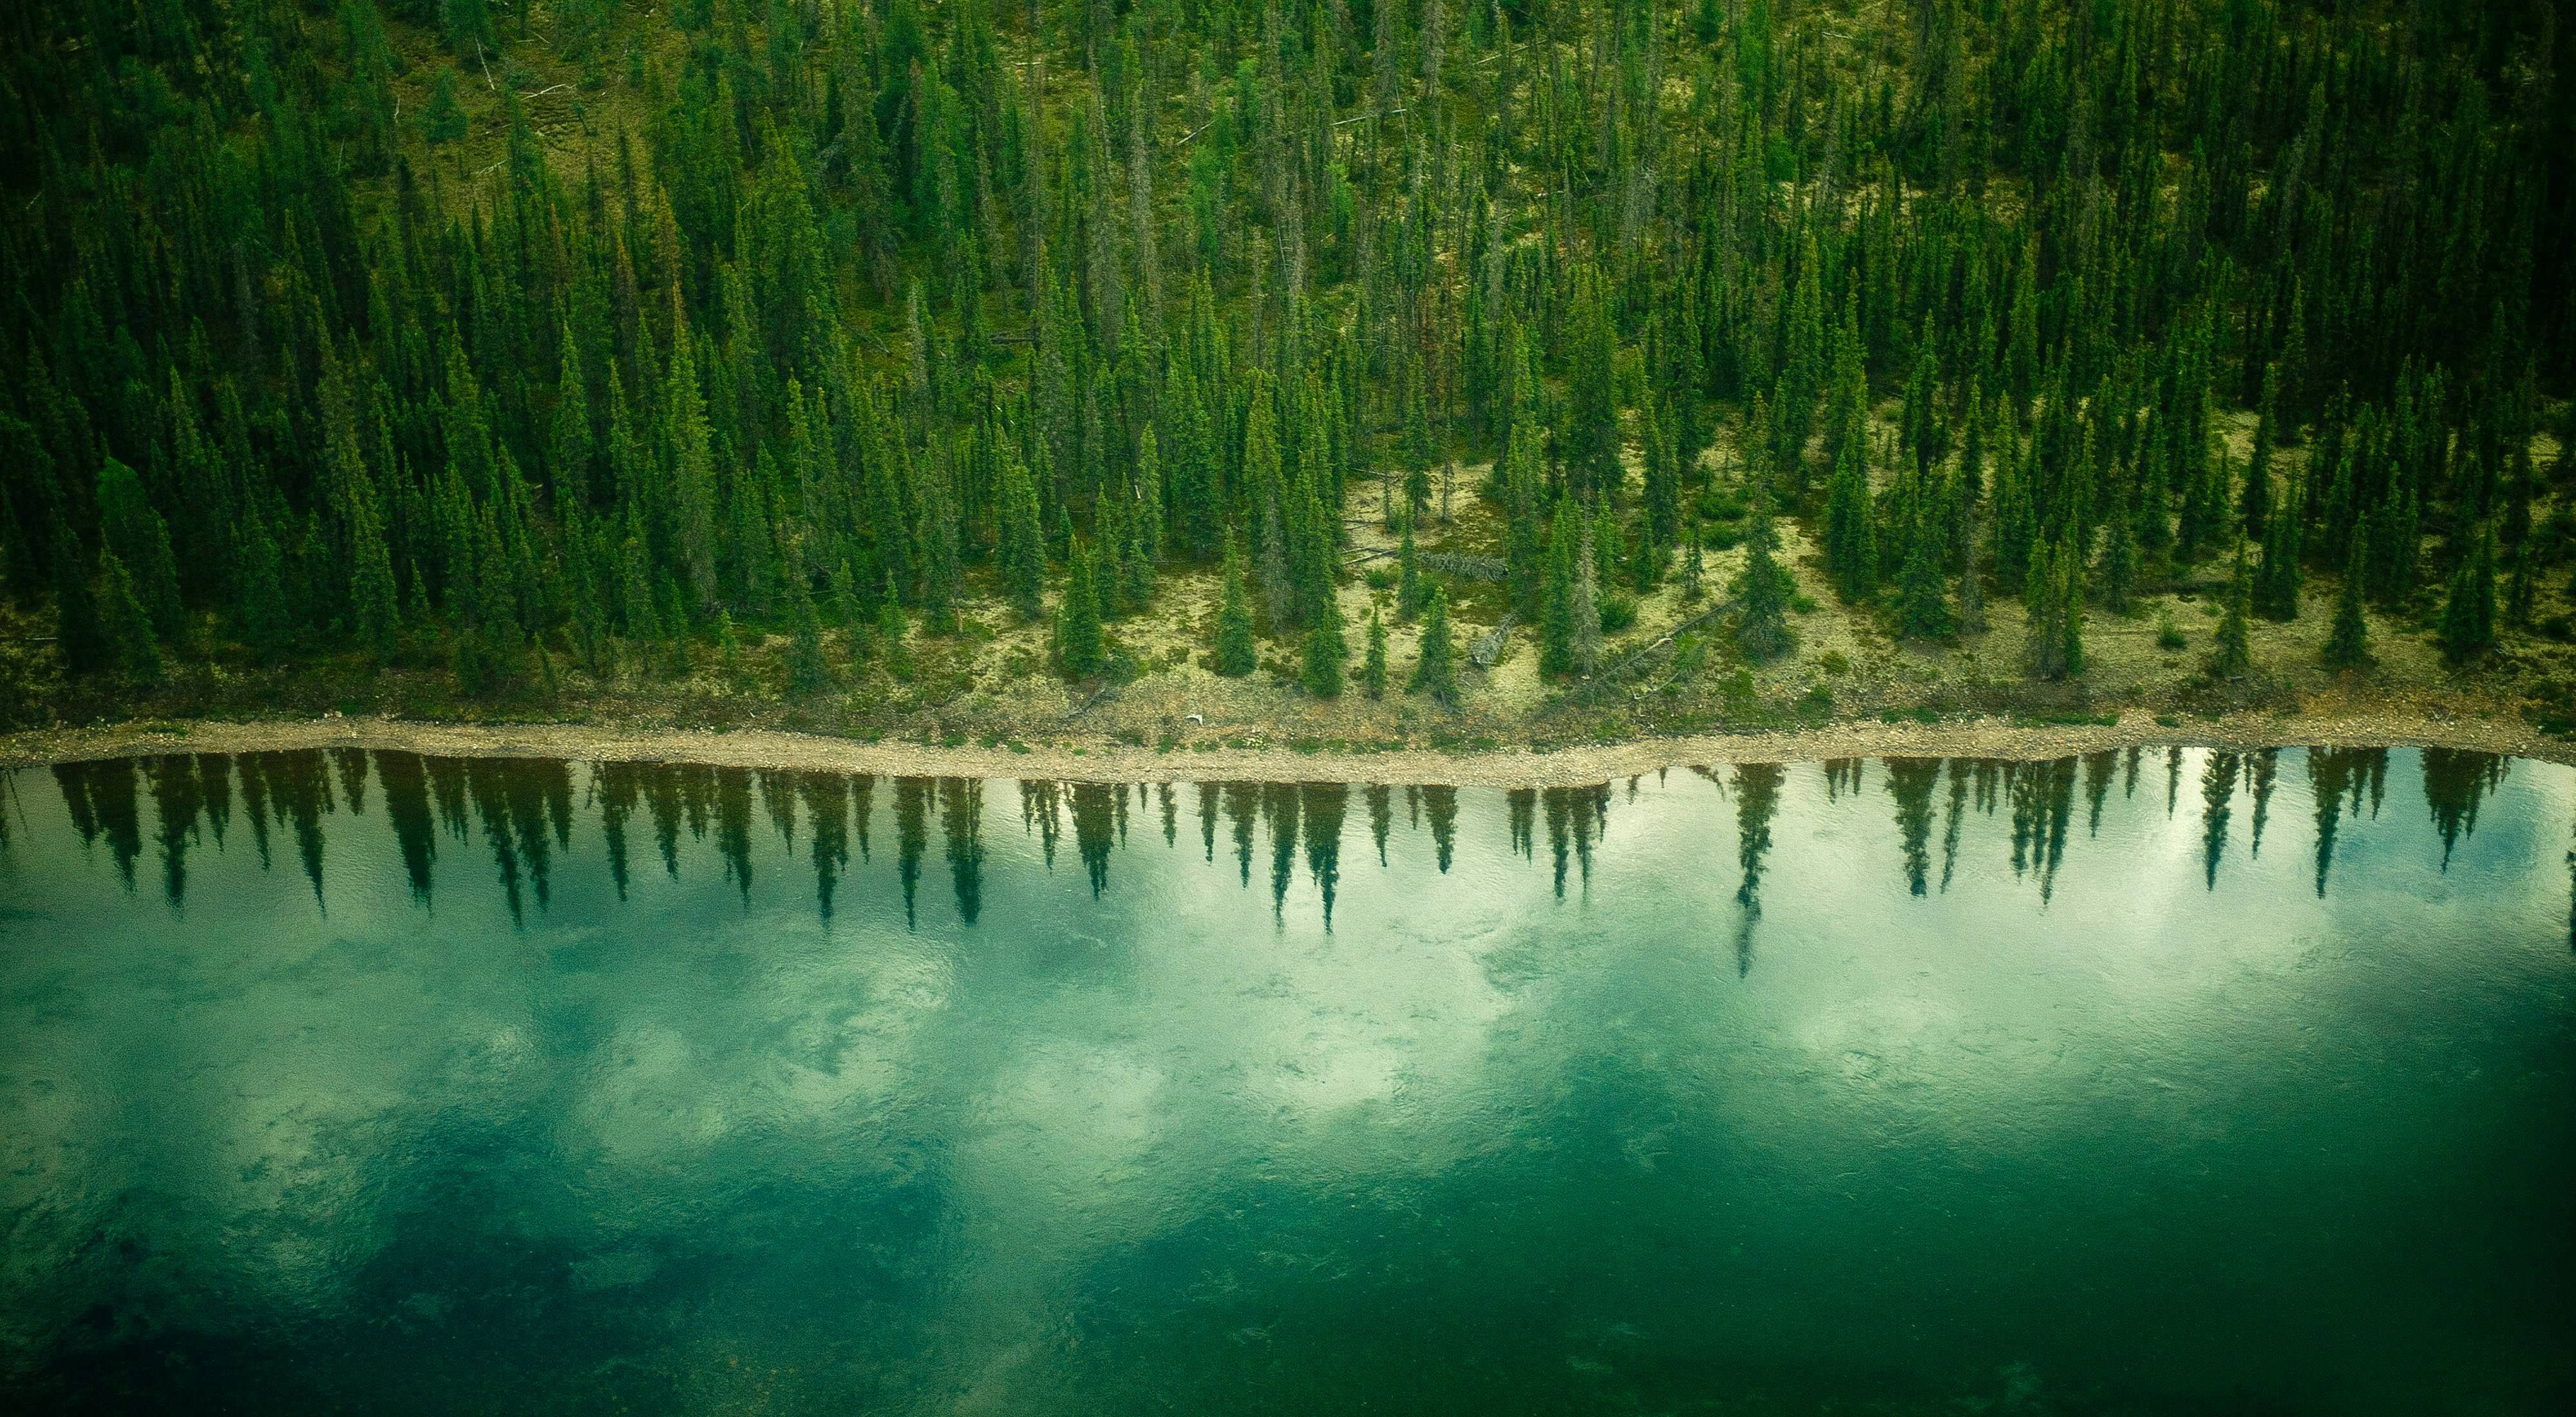 Aerial view of the Thelon River and forest landscape of Canada's far northern Thelon Game Sanctuary.